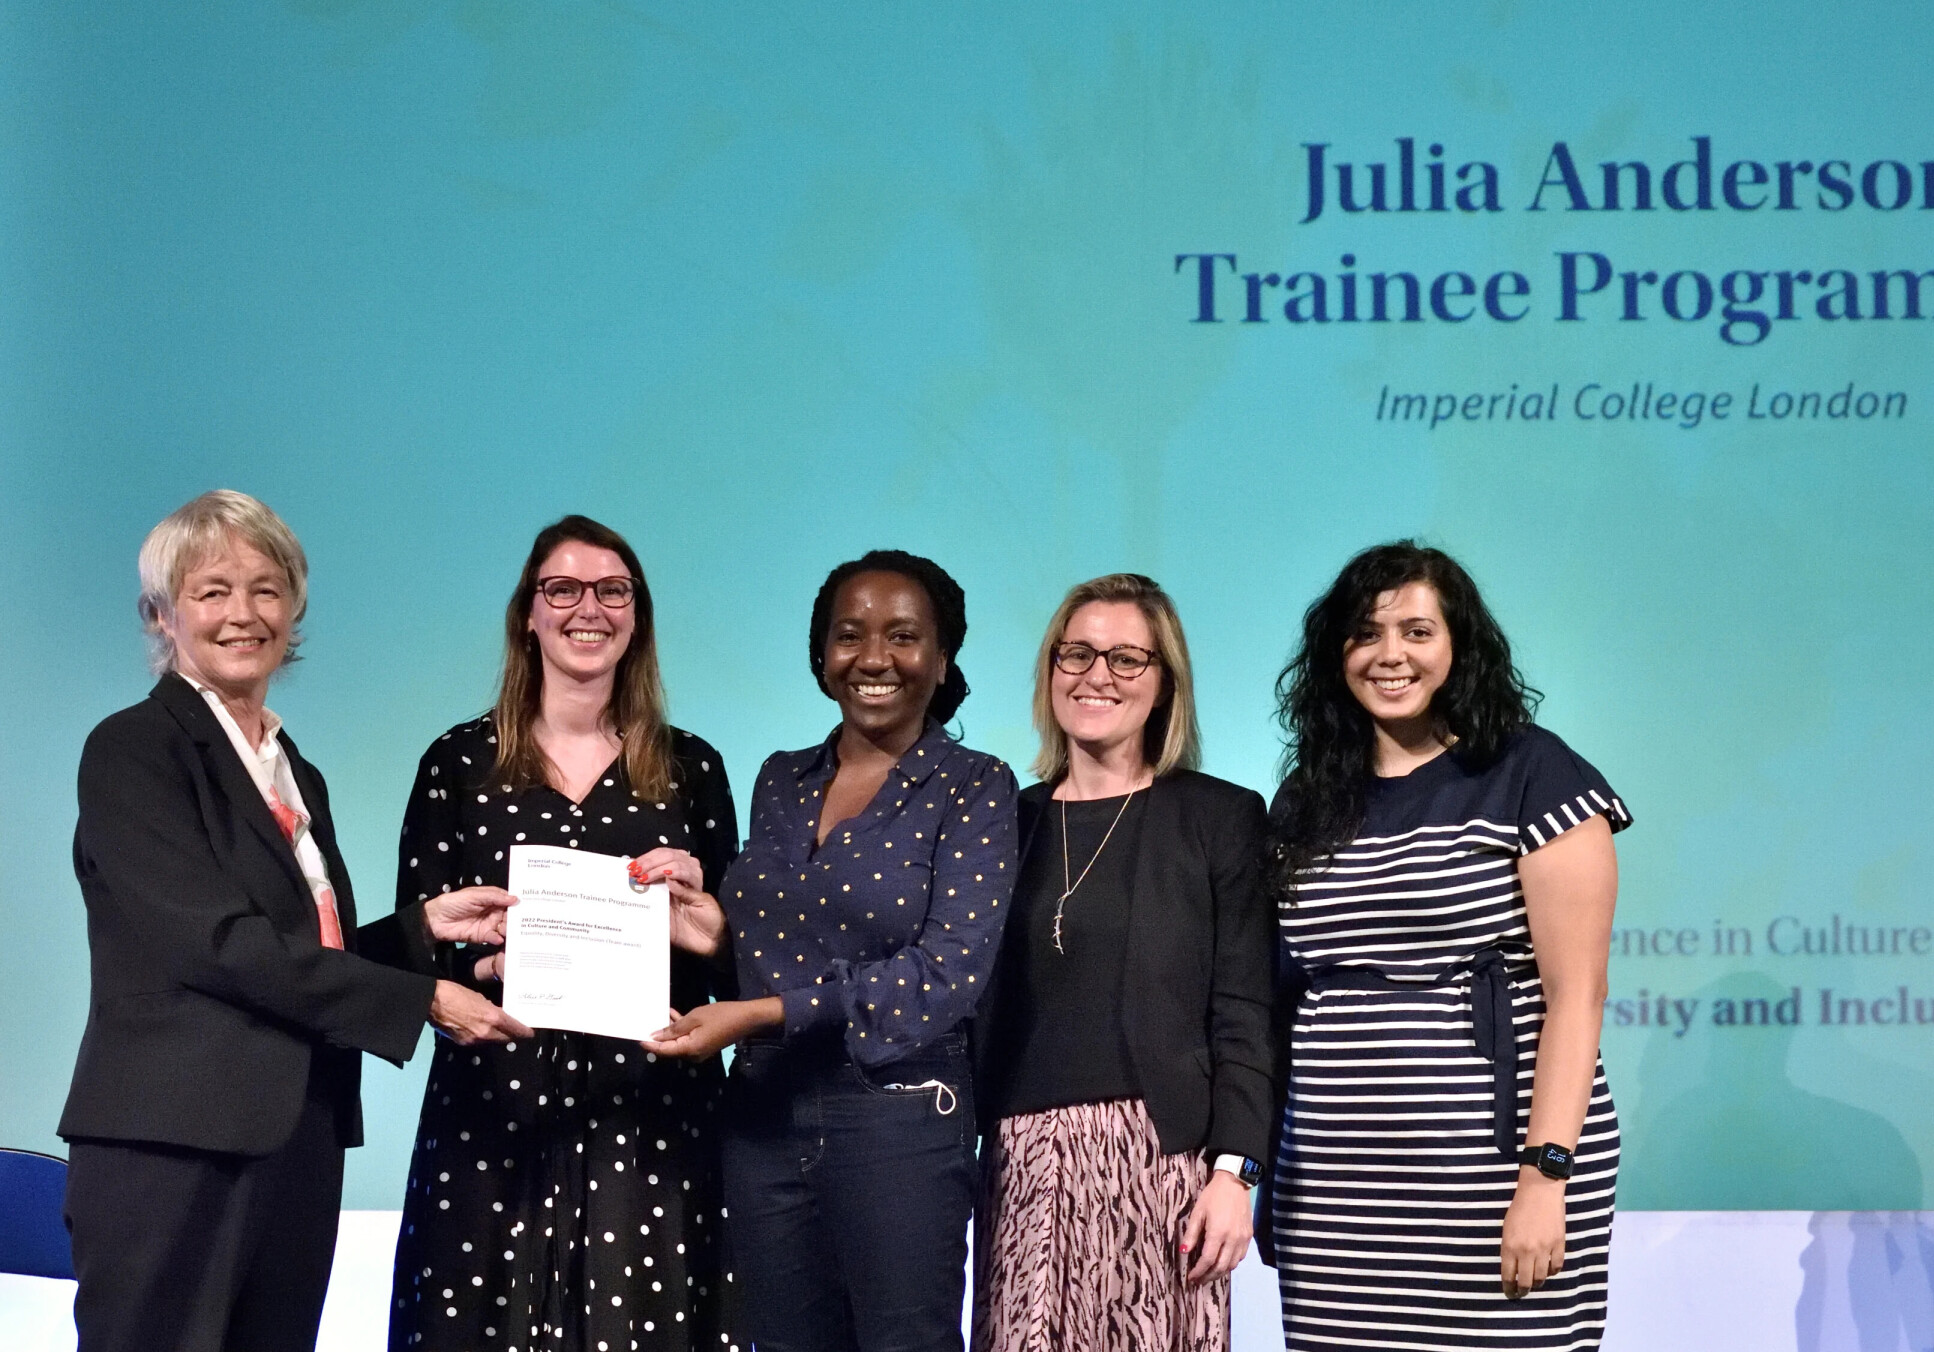 Julia Anderson Training Programme team collecting the 'President's Award' certificate on stage